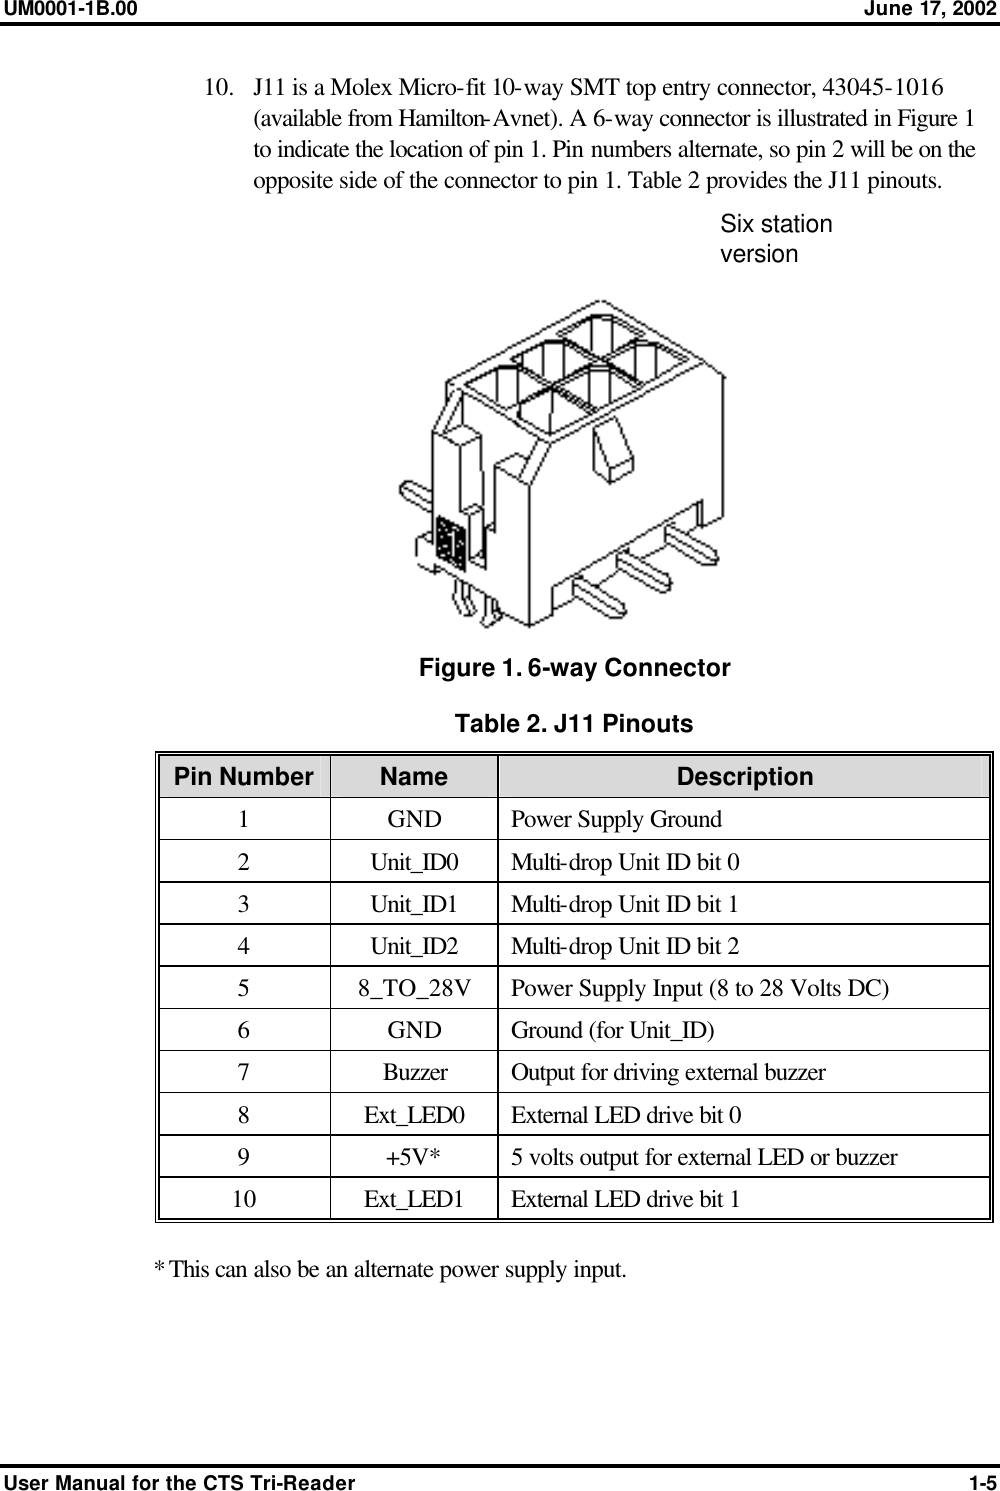 UM0001-1B.00 June 17, 2002 User Manual for the CTS Tri-Reader 1-5 10.  J11 is a Molex Micro-fit 10-way SMT top entry connector, 43045-1016 (available from Hamilton-Avnet). A 6-way connector is illustrated in Figure 1 to indicate the location of pin 1. Pin numbers alternate, so pin 2 will be on the opposite side of the connector to pin 1. Table 2 provides the J11 pinouts.  Figure 1. 6-way Connector Table 2. J11 Pinouts Pin Number Name Description 1  GND Power Supply Ground 2  Unit_ID0 Multi-drop Unit ID bit 0 3  Unit_ID1 Multi-drop Unit ID bit 1 4  Unit_ID2 Multi-drop Unit ID bit 2 5  8_TO_28V Power Supply Input (8 to 28 Volts DC) 6  GND Ground (for Unit_ID) 7  Buzzer Output for driving external buzzer 8  Ext_LED0 External LED drive bit 0 9  +5V* 5 volts output for external LED or buzzer 10  Ext_LED1 External LED drive bit 1  * This can also be an alternate power supply input.  Six station version 